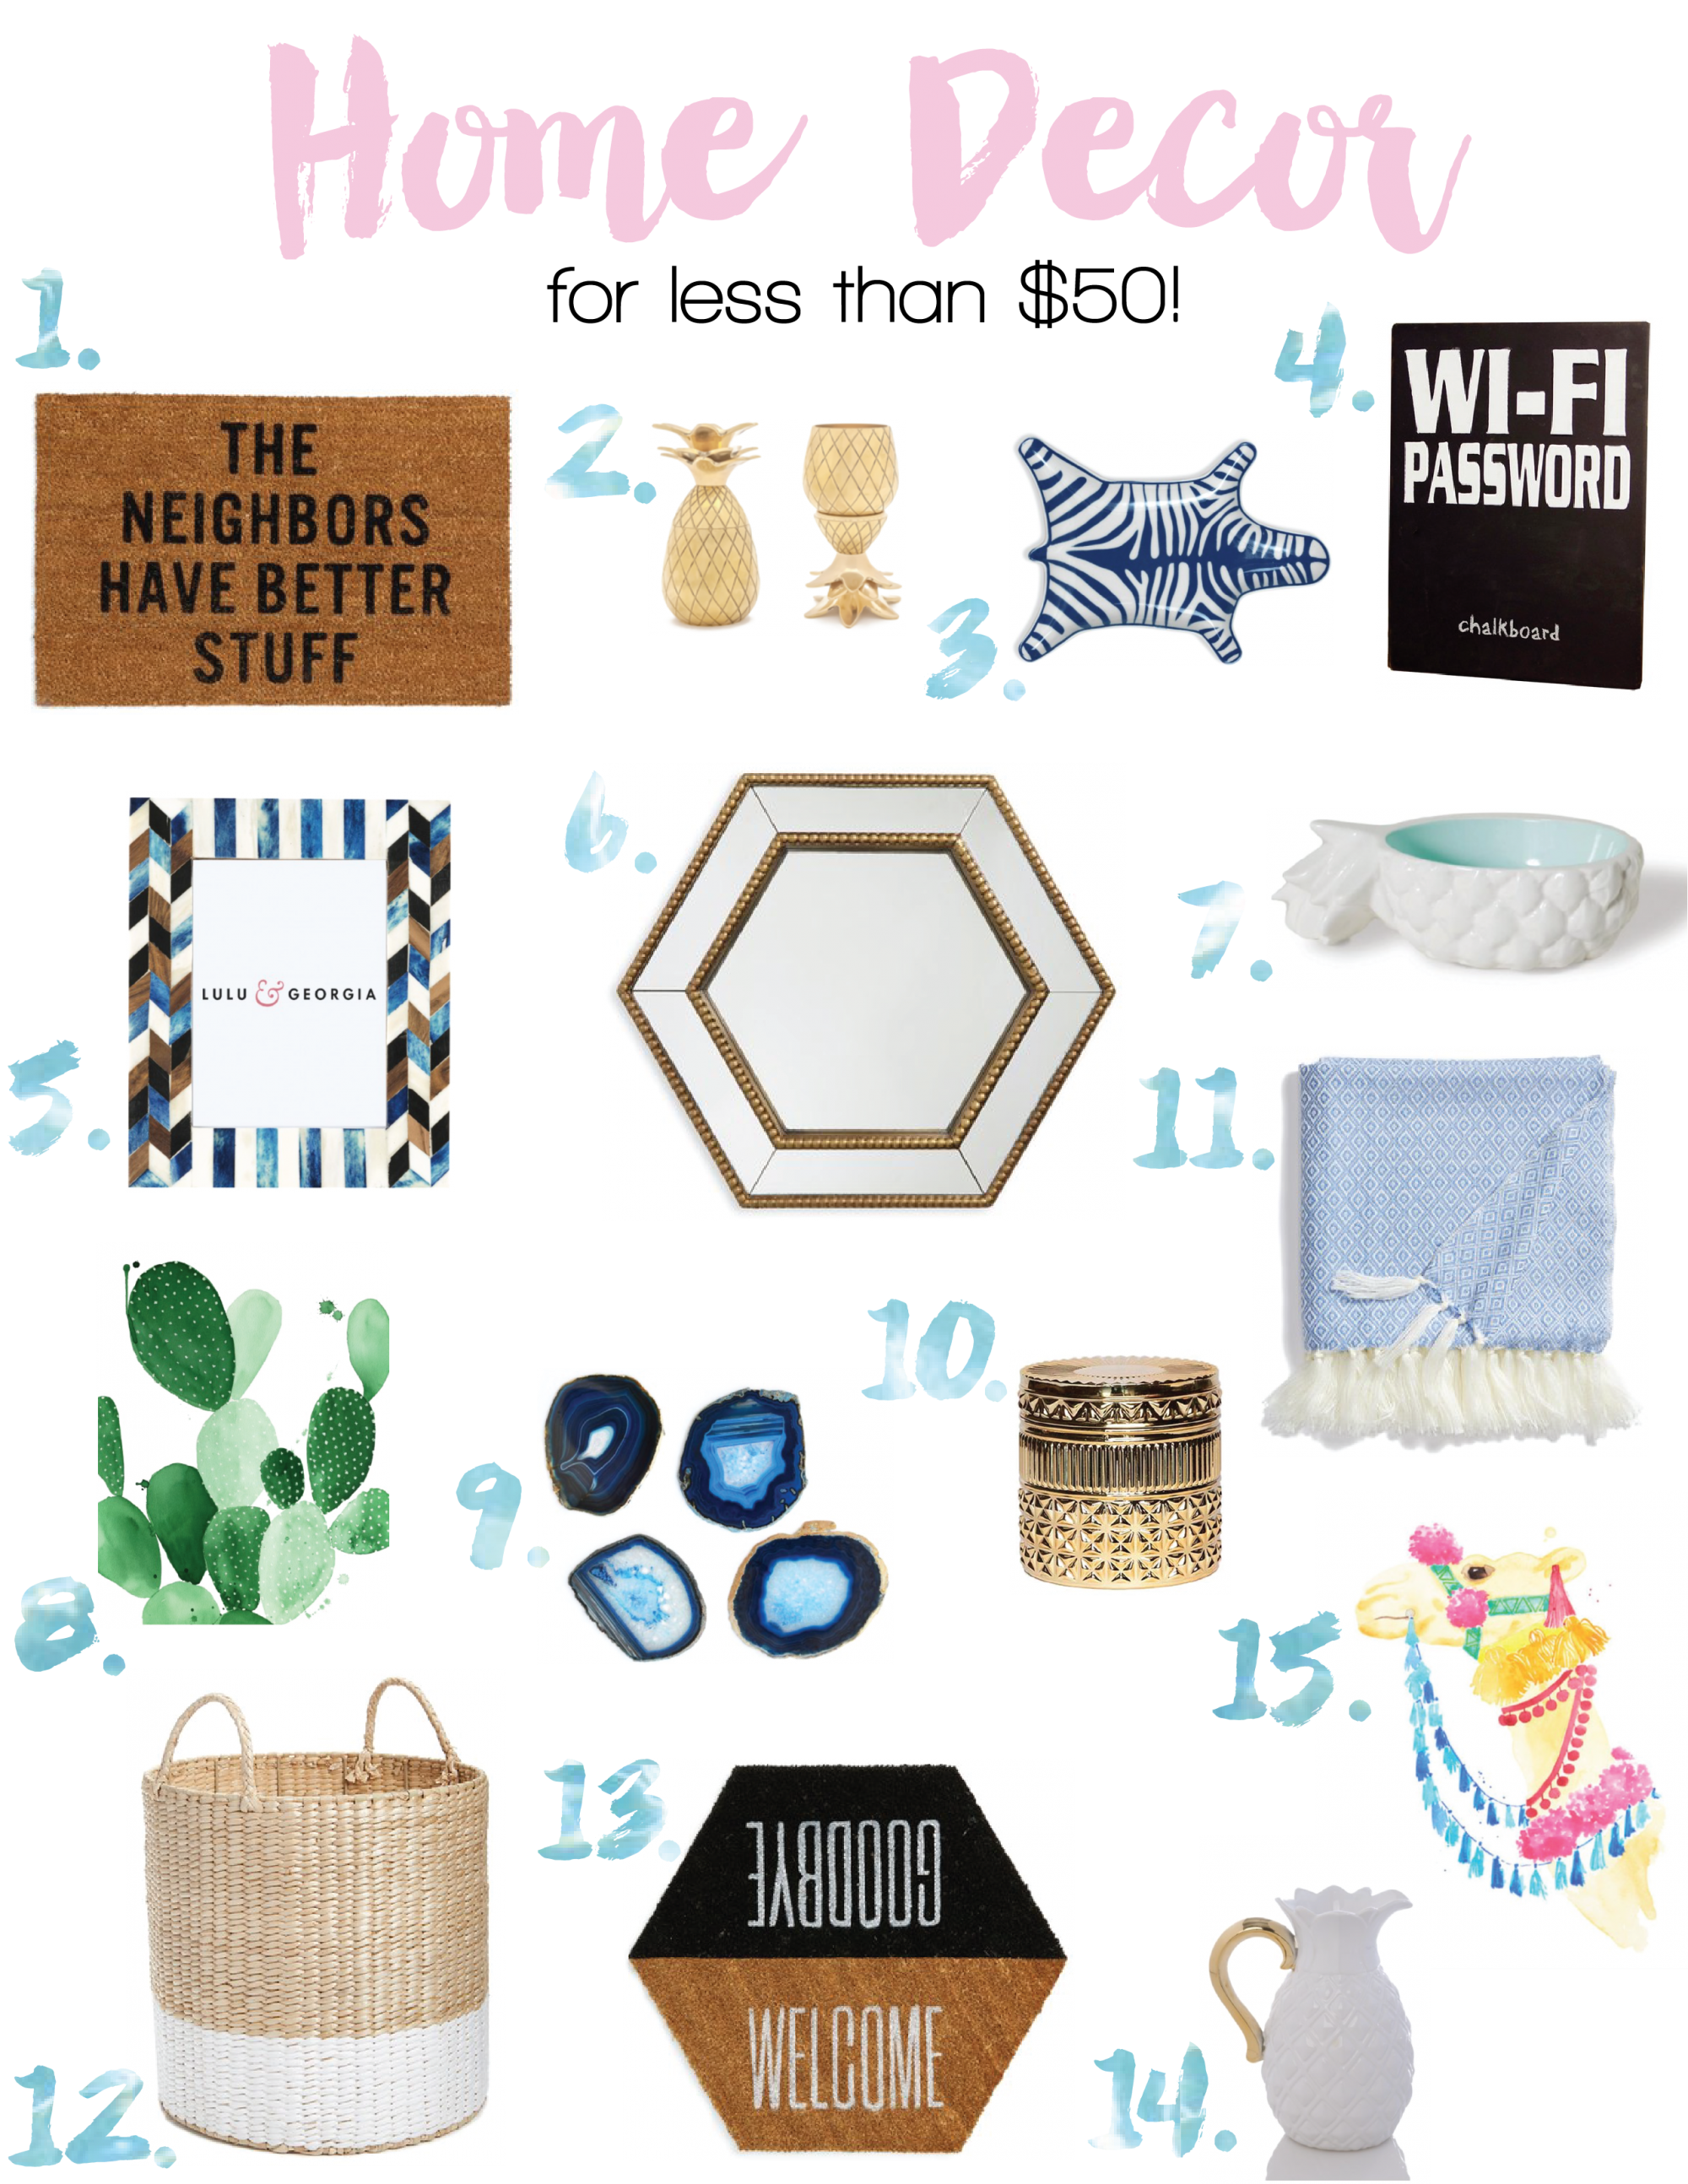 Home Decor for Less than $50